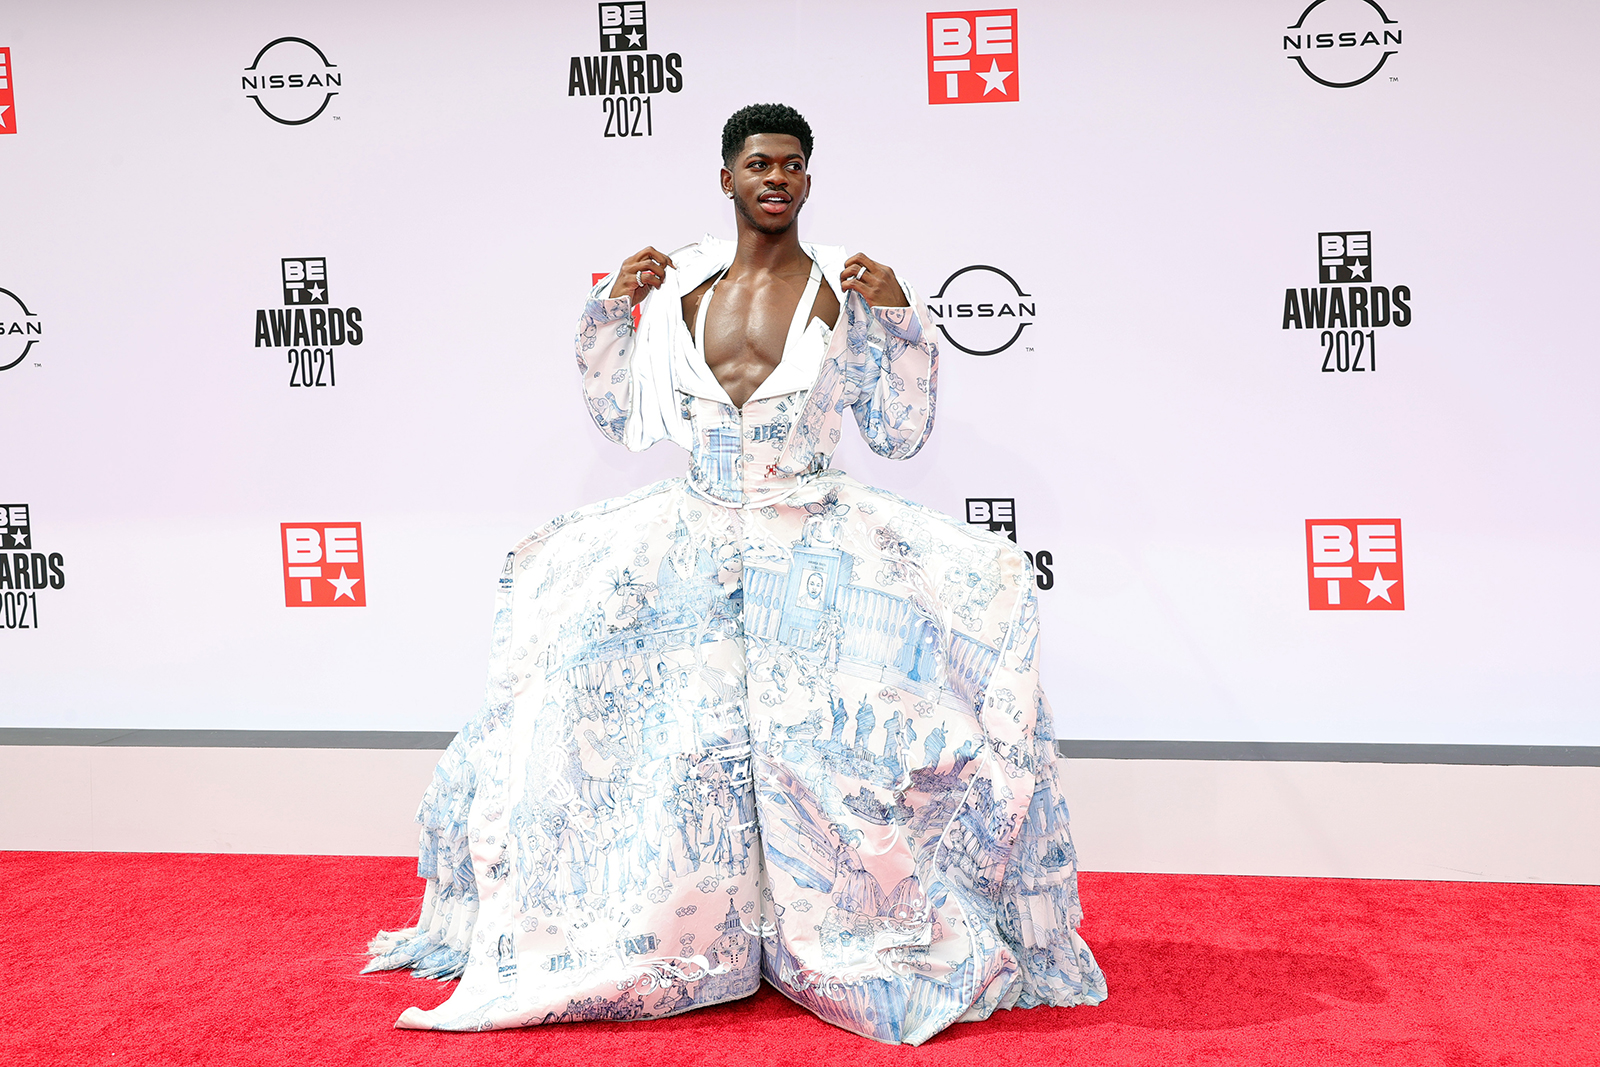 Lil Nas X wows BET Awards 2021 red carpet in elaborate gown - CNN Style